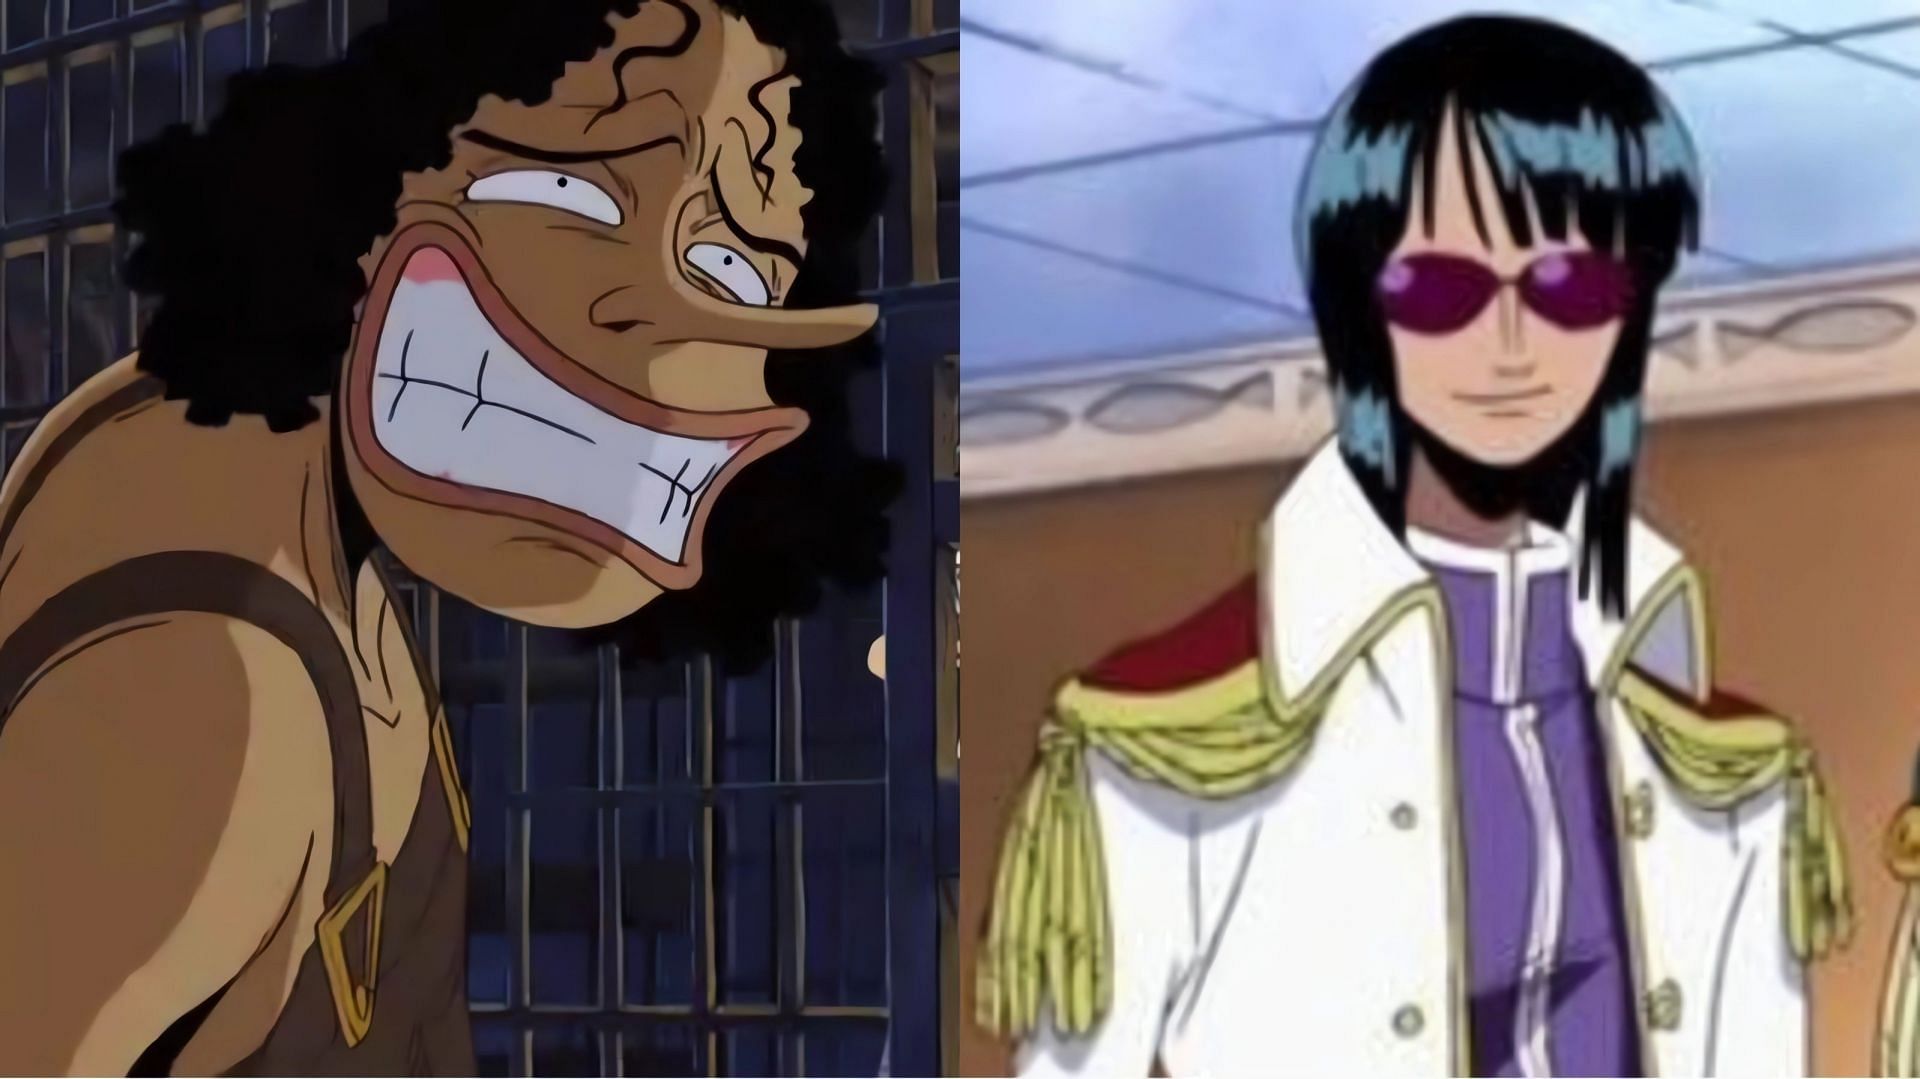 Usopp (left) and Robin (right) as seen in the One Piece arc (Image via Toei Animation)